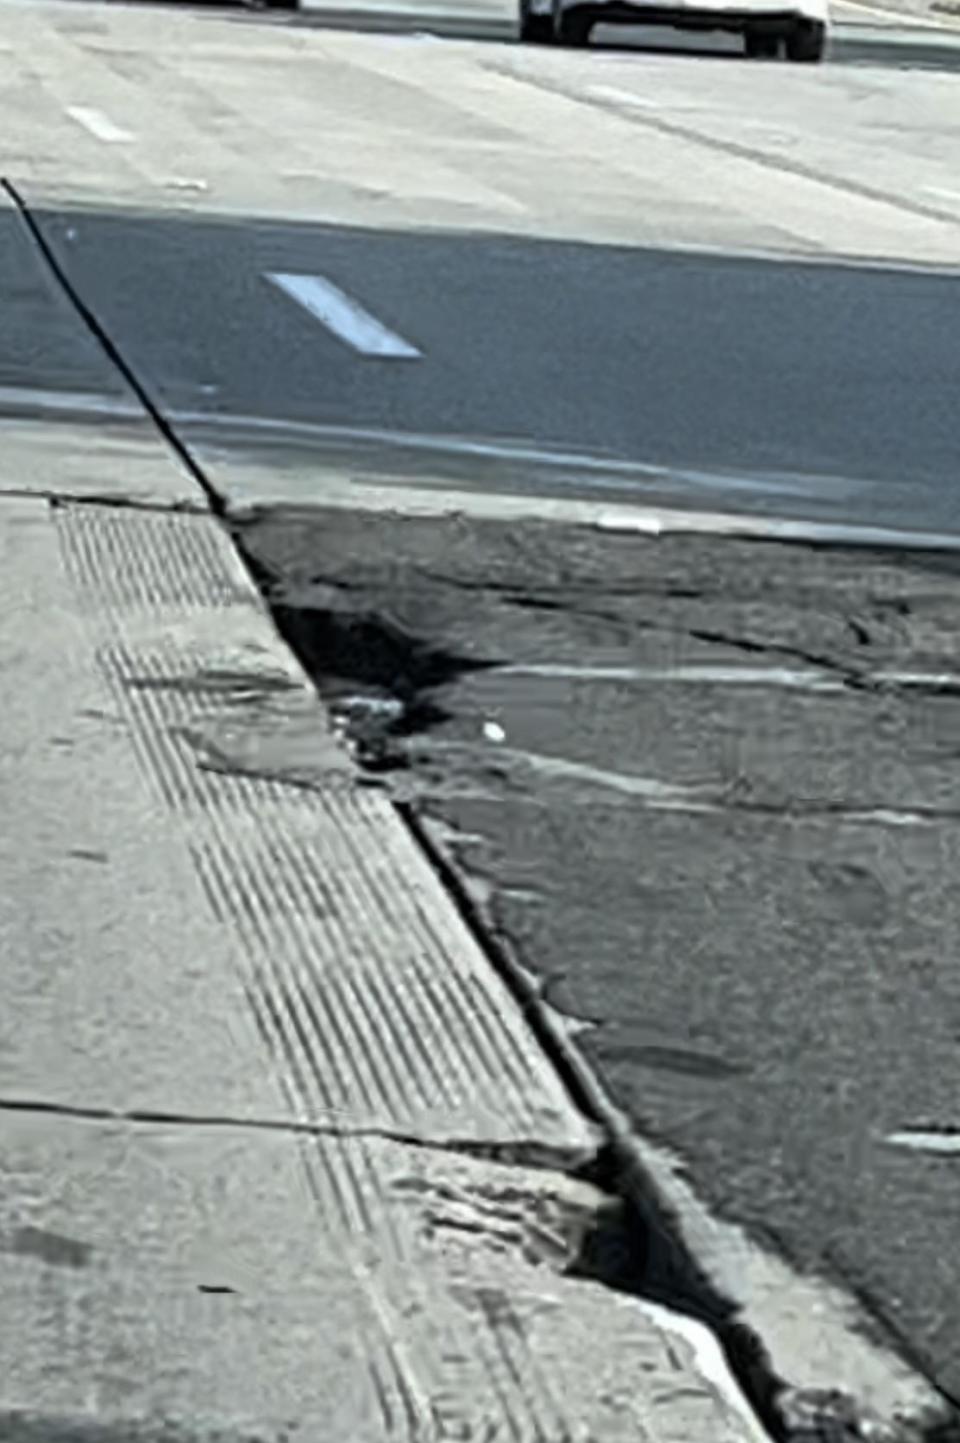 The pothole that Angie Rubin hit on the 101 South freeway in April 2022. / Credit: Angie Rubin